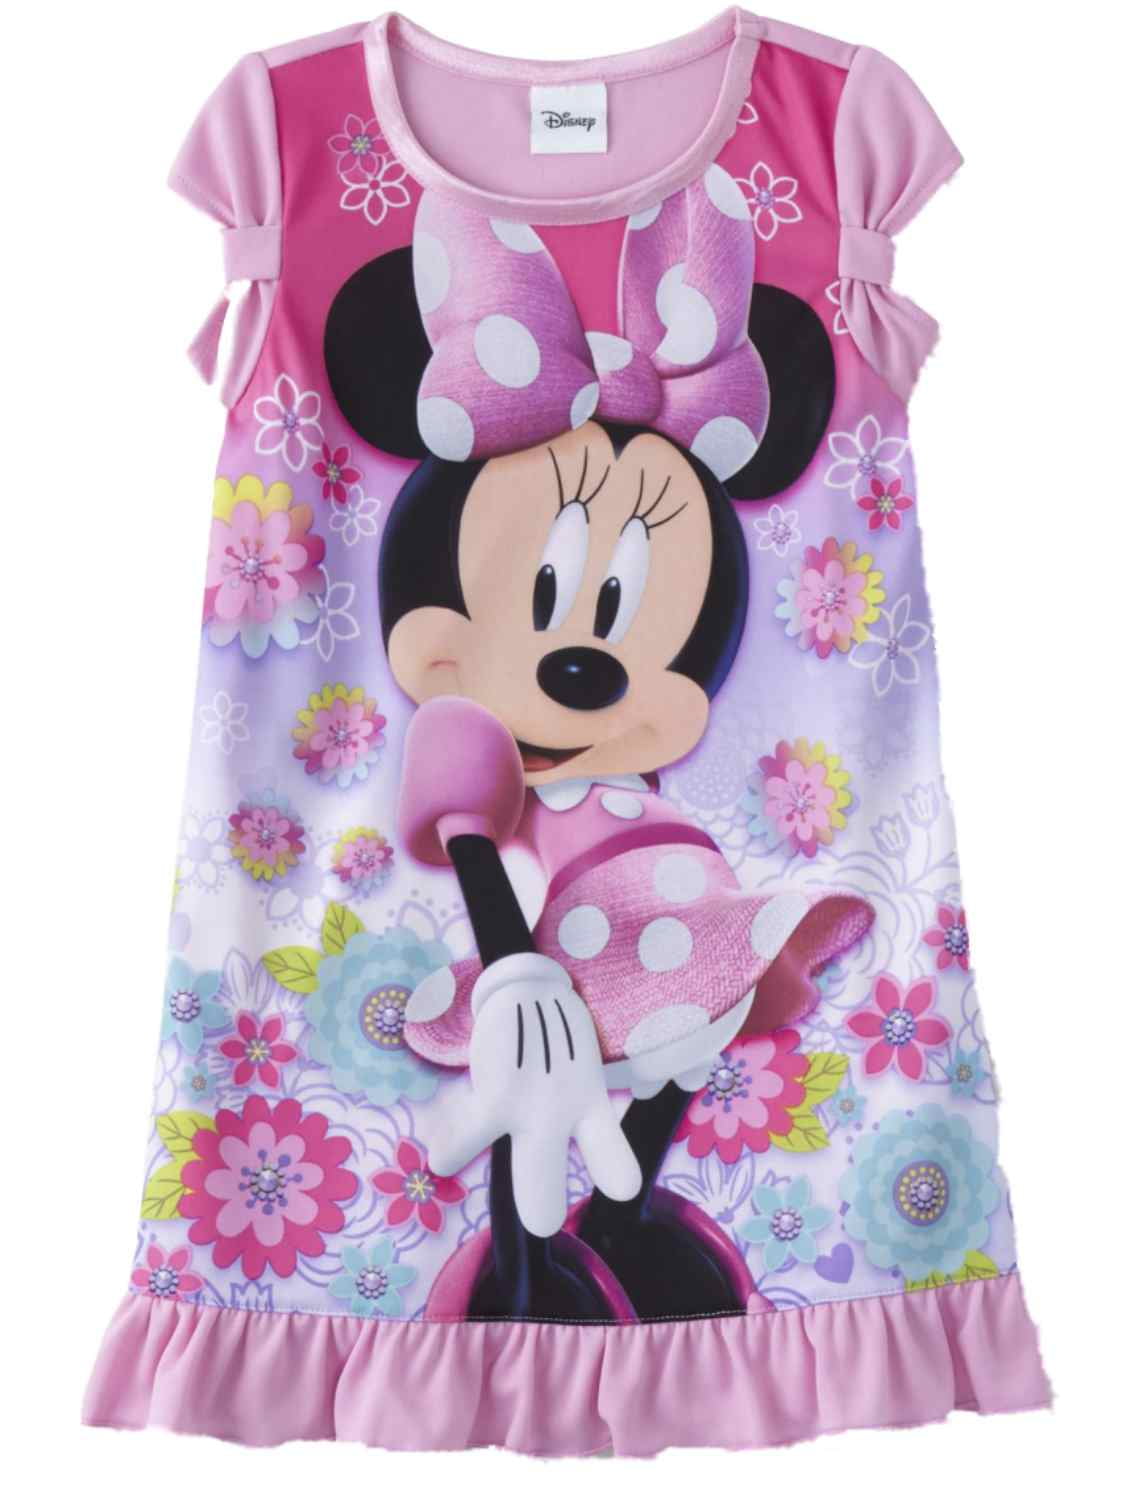 NEW Minnie Mouse Disney Figure Pajamas Outfit Baby Sleep Shirt Girls 12-24 Month